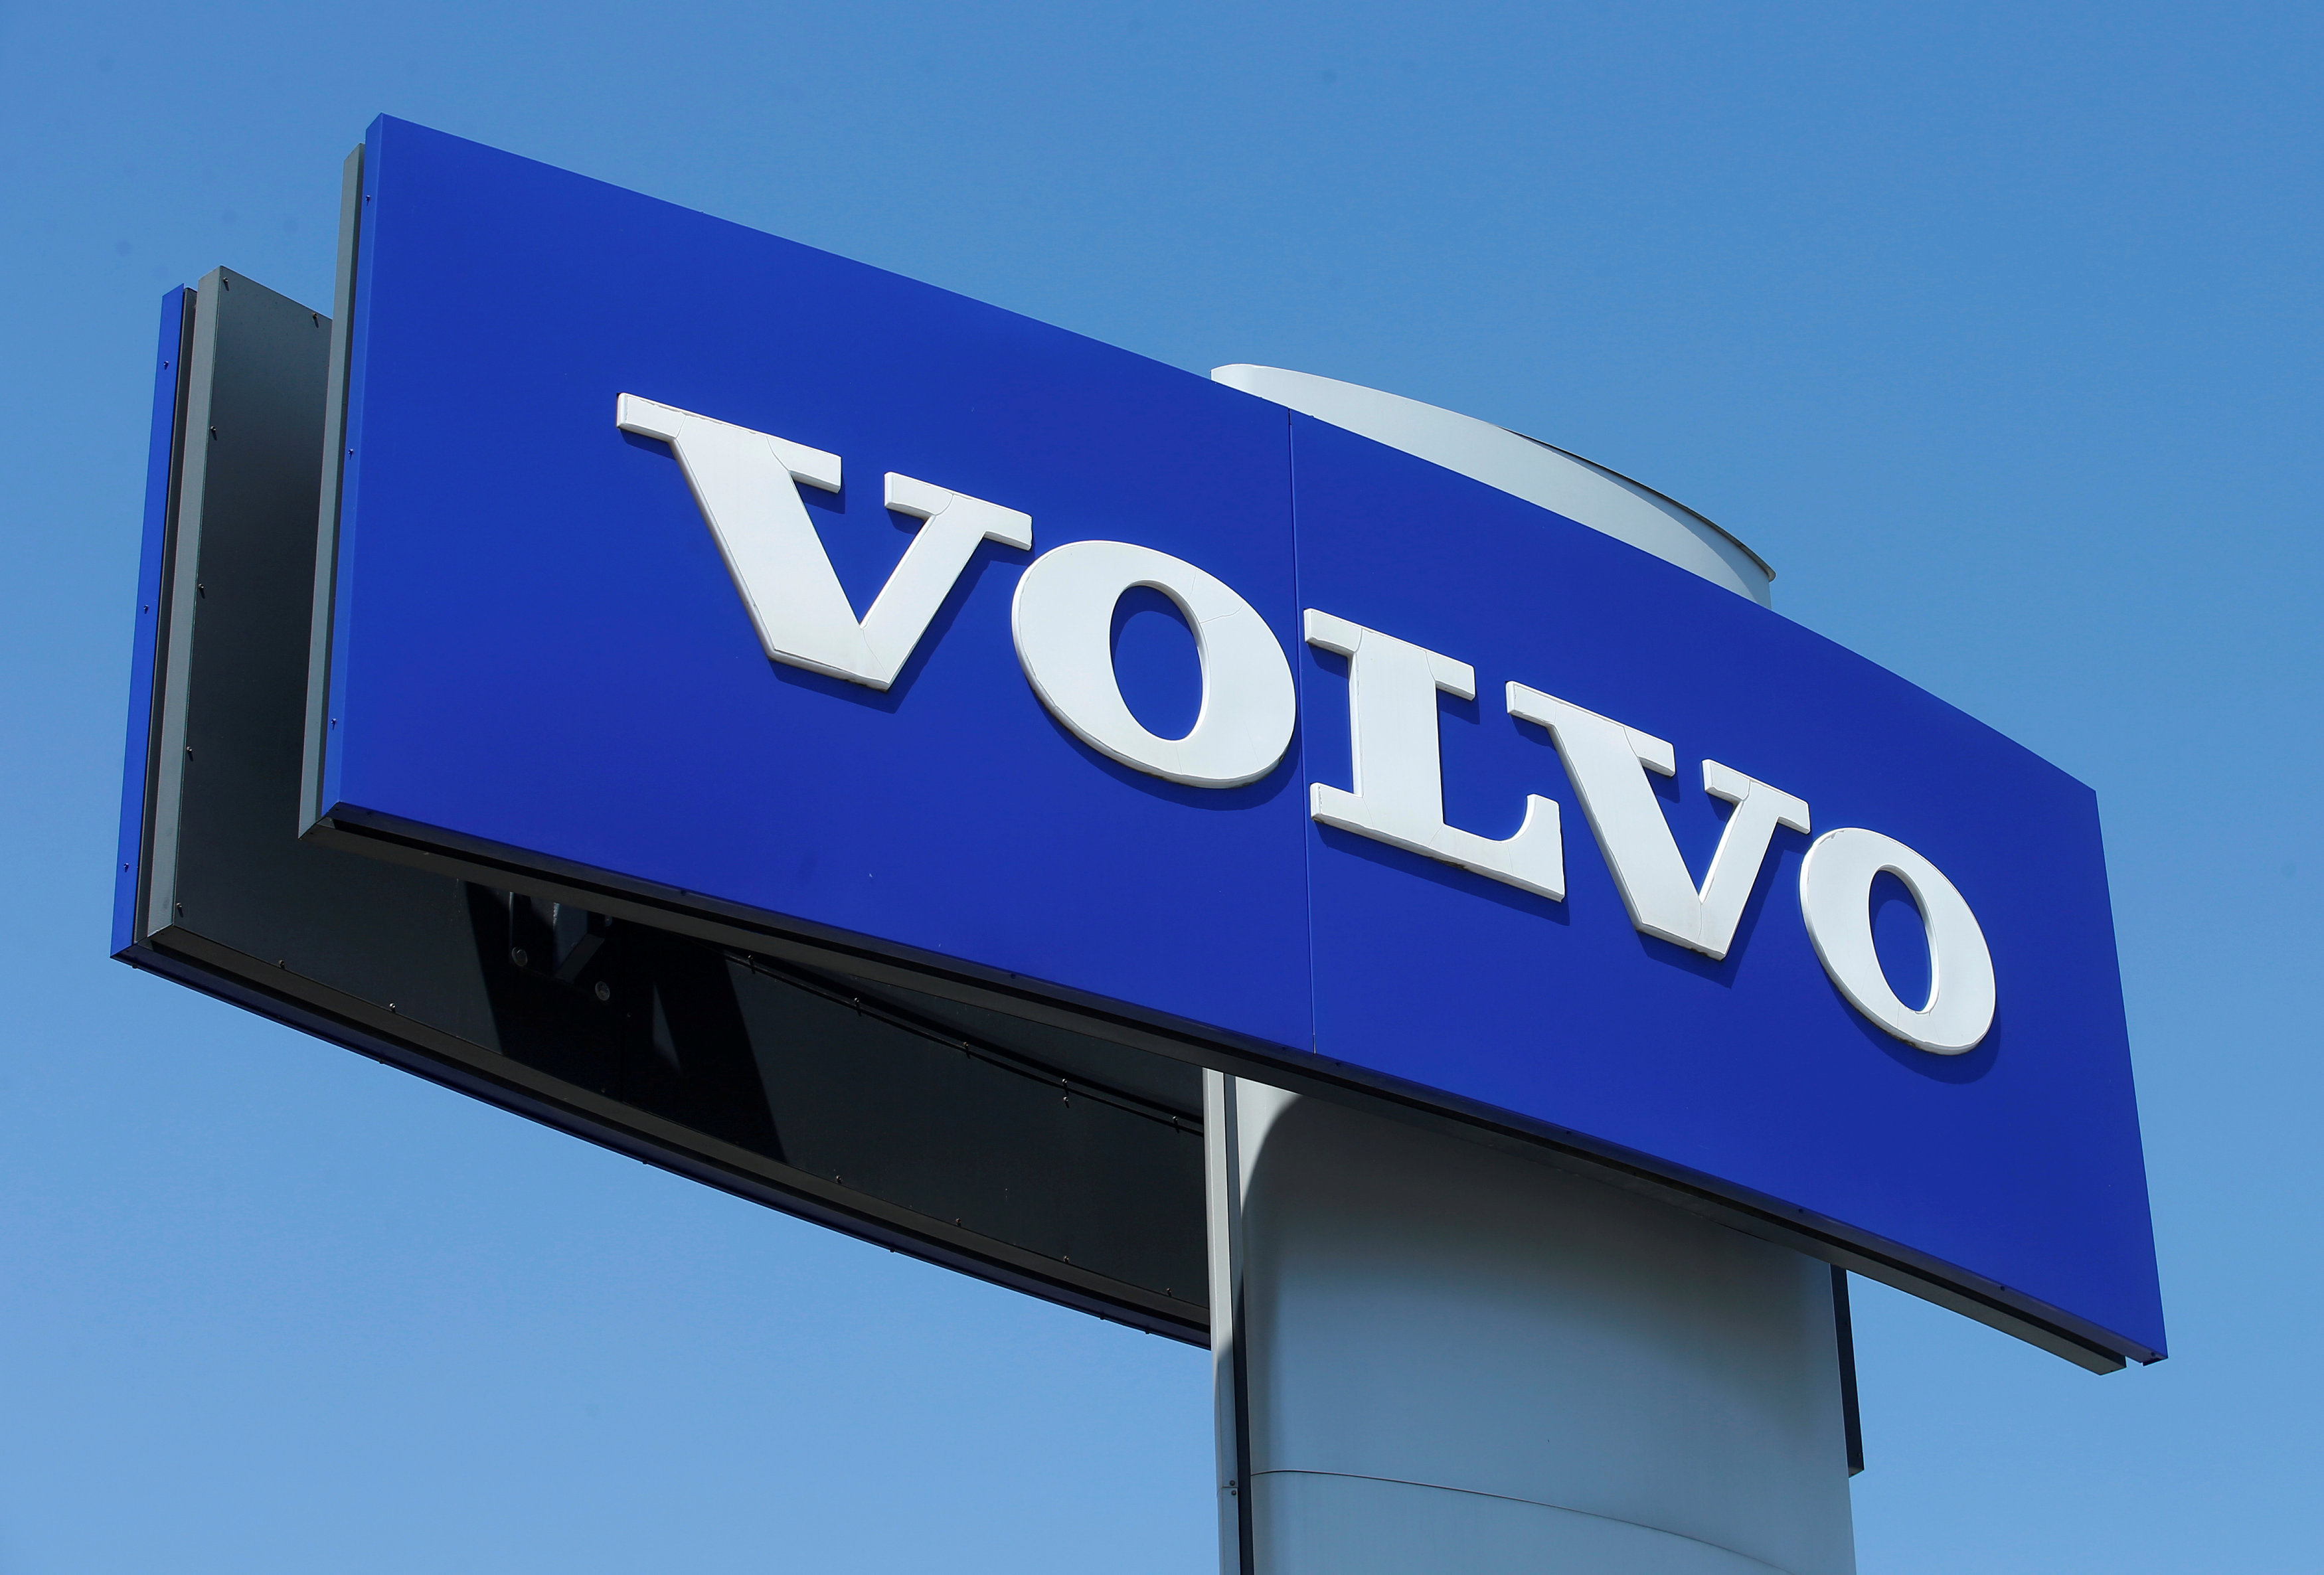 Volvo sets goal of 25% recycled plastics in cars from 2025